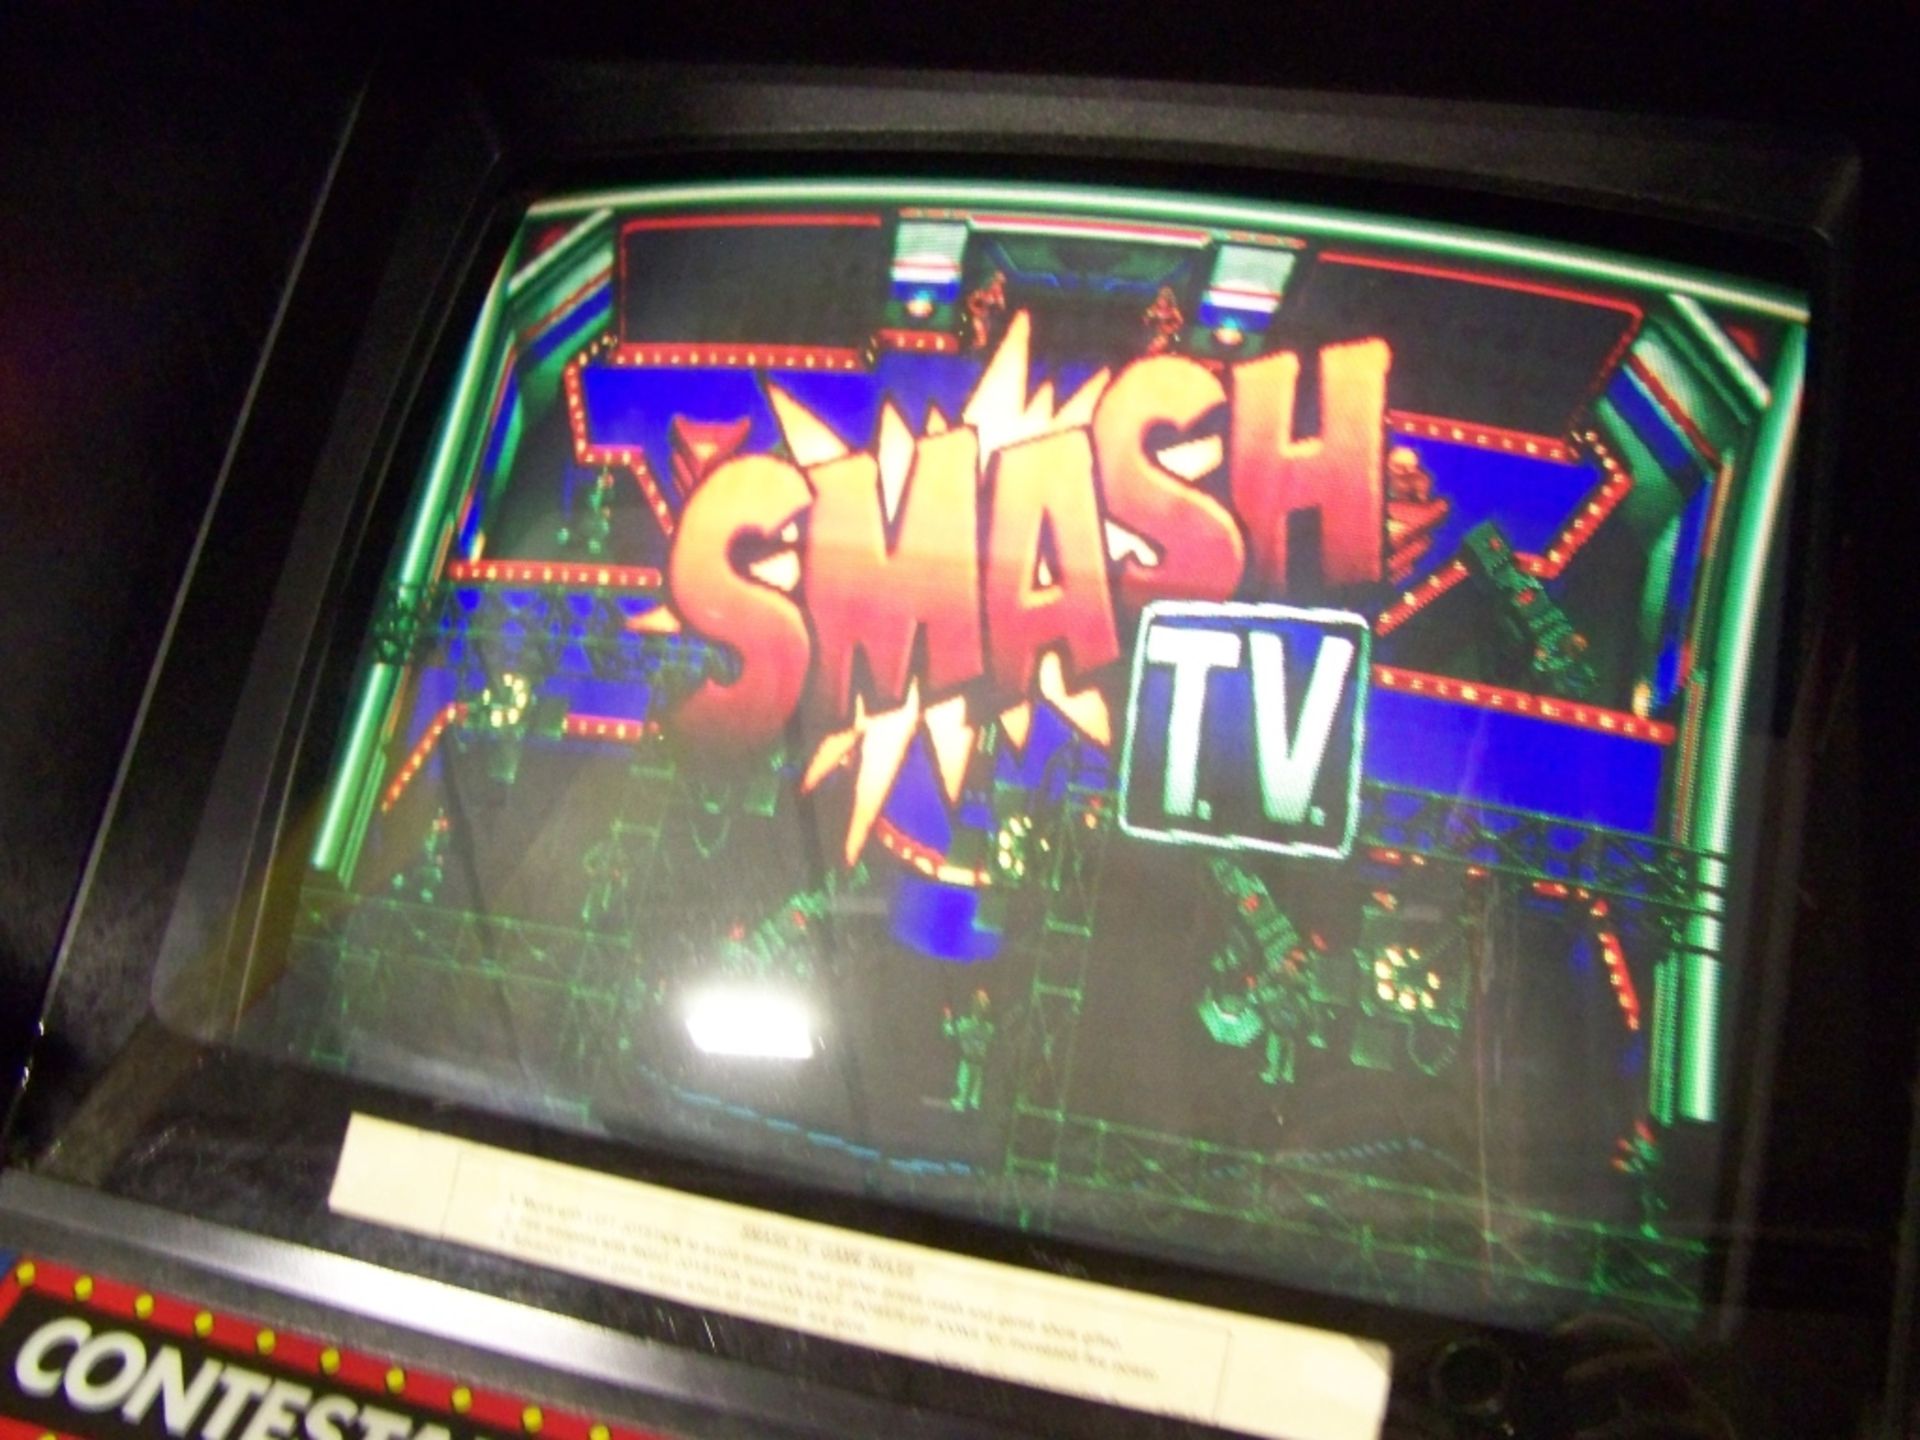 SMASH TV CLASSIC ARCADE GAME WILLIAMS Item is in used condition. Evidence of wear and commercial - Image 9 of 9